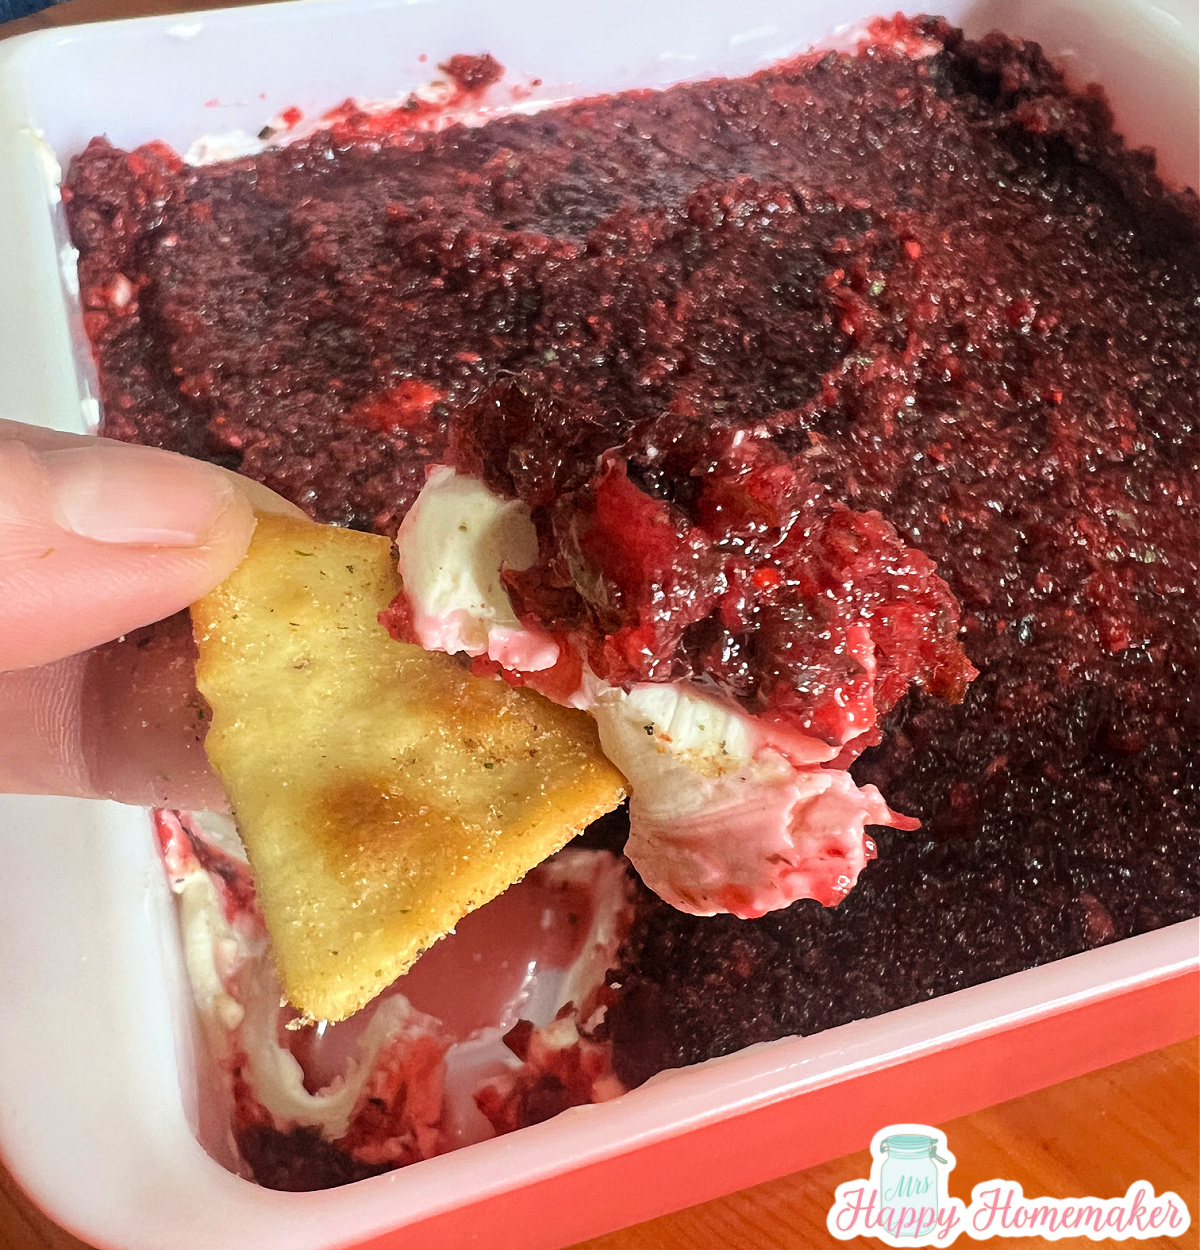 Cranberry jalapeno cream cheese dip on a cracker with a pink square dish full of dip underneath 